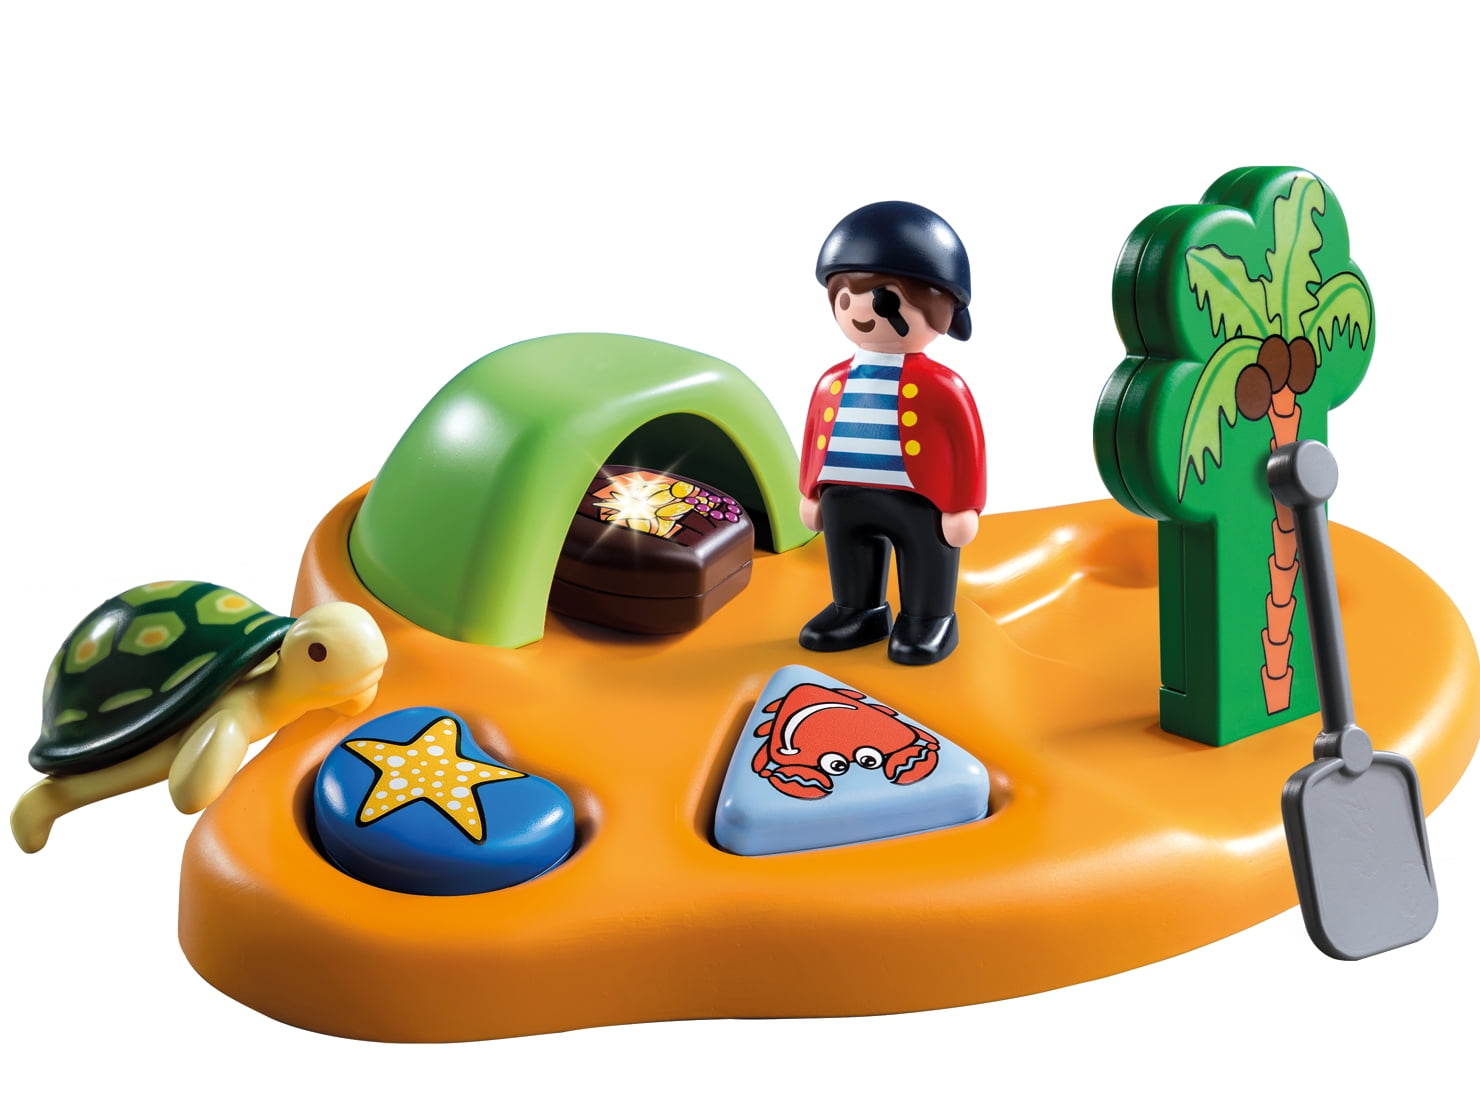 Playmobil Pirates Pirate Raft Carry Case Building Set 5655 NEW Educational 